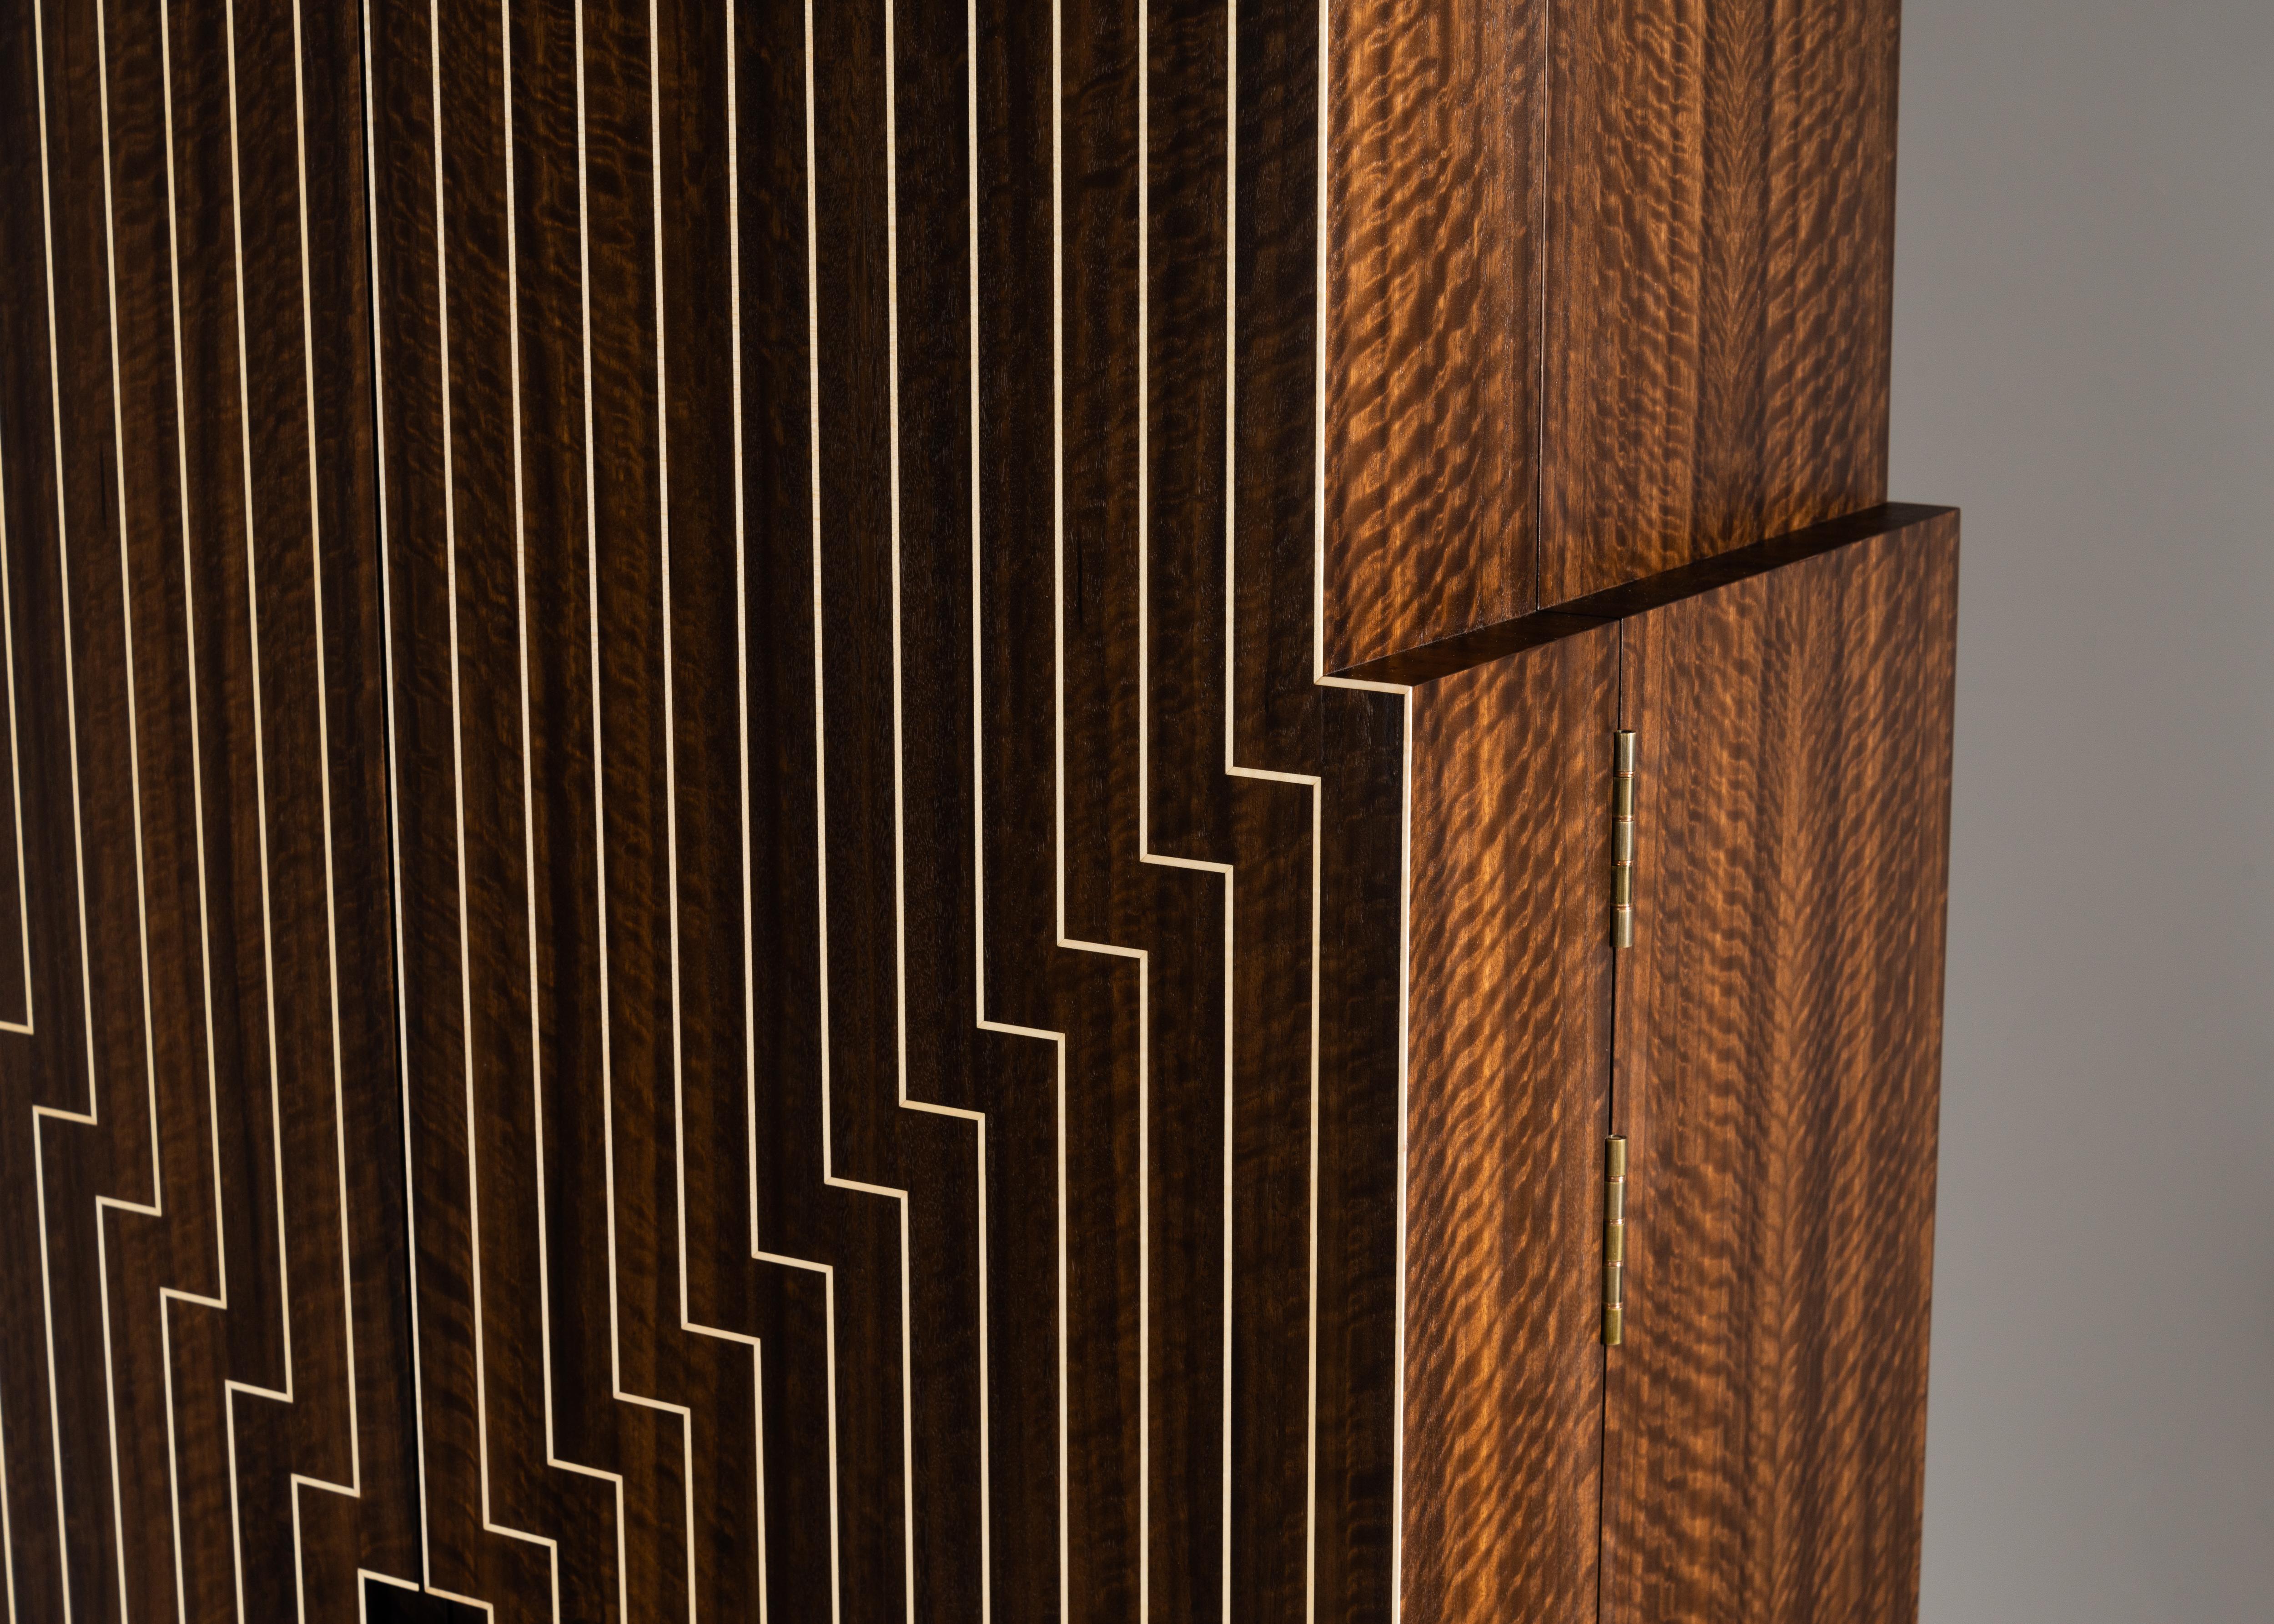 Edition of 6 + 1 AP.

Influenced heavily by the visionary artist Frank Stella's painting Six Mile Bottom, this cabinet draws the eye to its center with hypnotizing concentric lines. Its Eucalyptus doors are inlaid with ripple sycamore and grounded